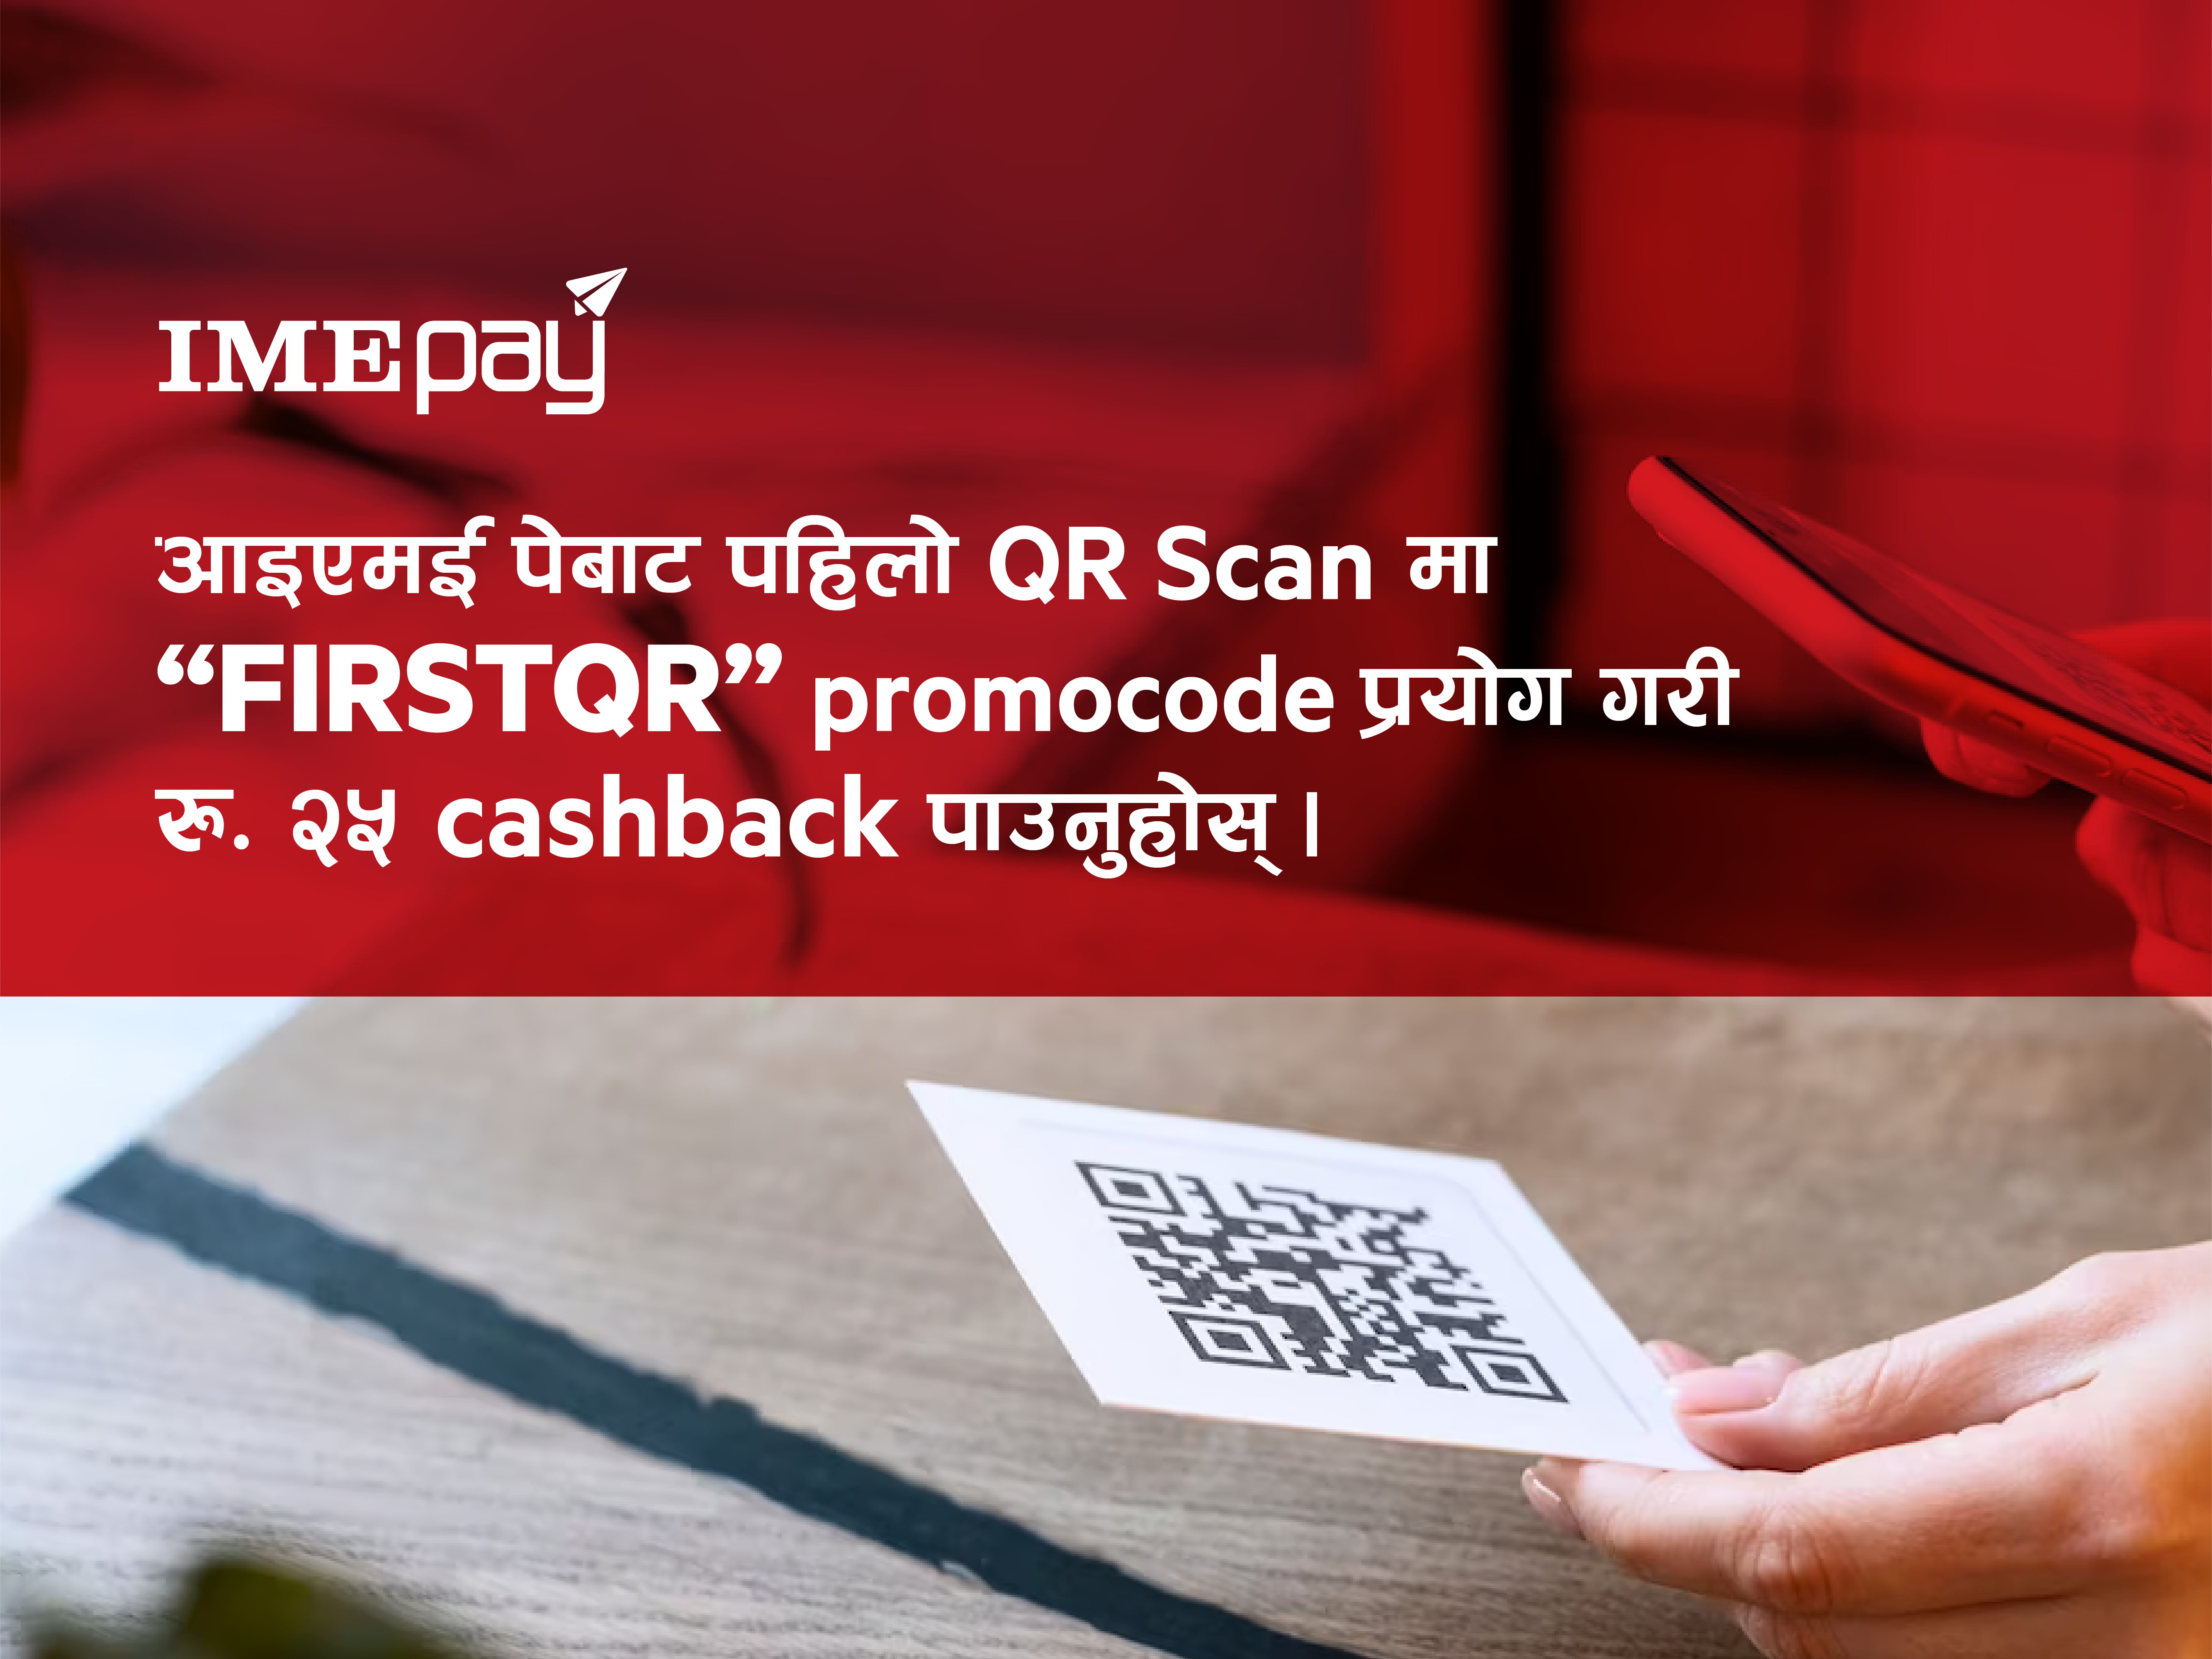 Rupee 25 cashback for first time QR payment on “IME Pay”